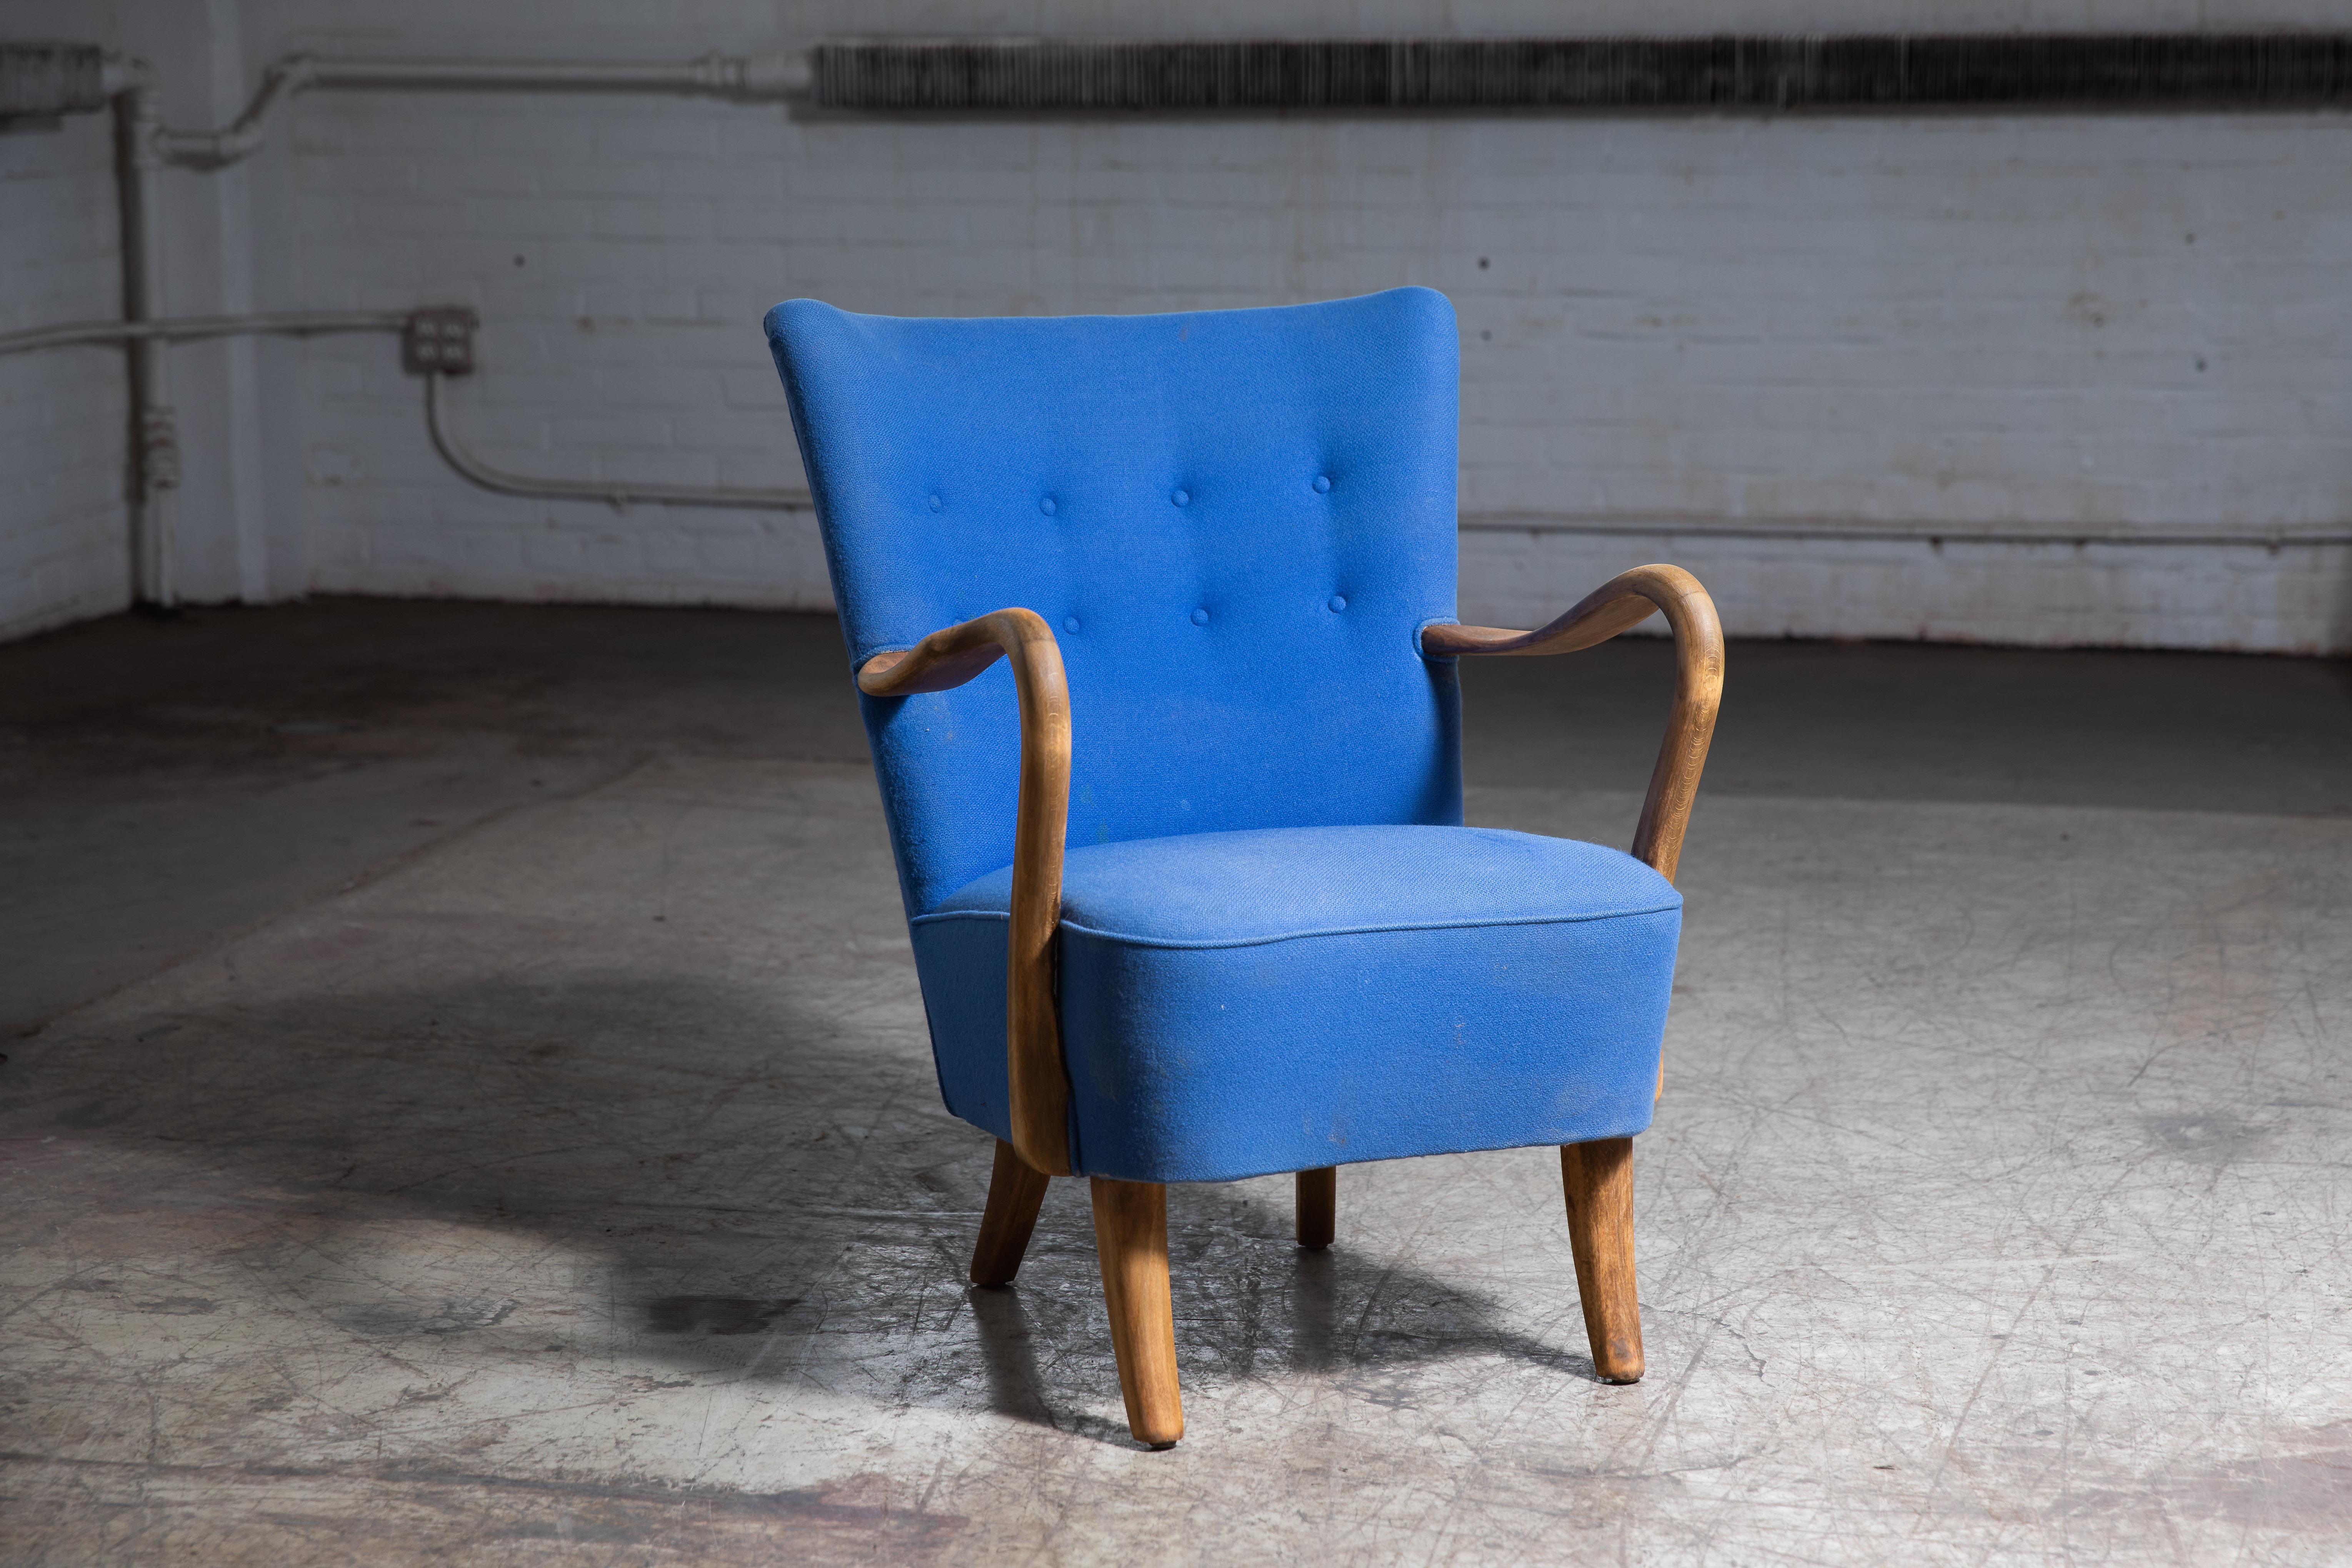 Classic elegant Danish high back armchair from the 1940s by Alfred Christensen for Slagelse Mobelvaerk with open armrests in beautifully curved mahogany stained beech. Nice slim elegant sculptural silhouette. Solid and sturdy construction and the